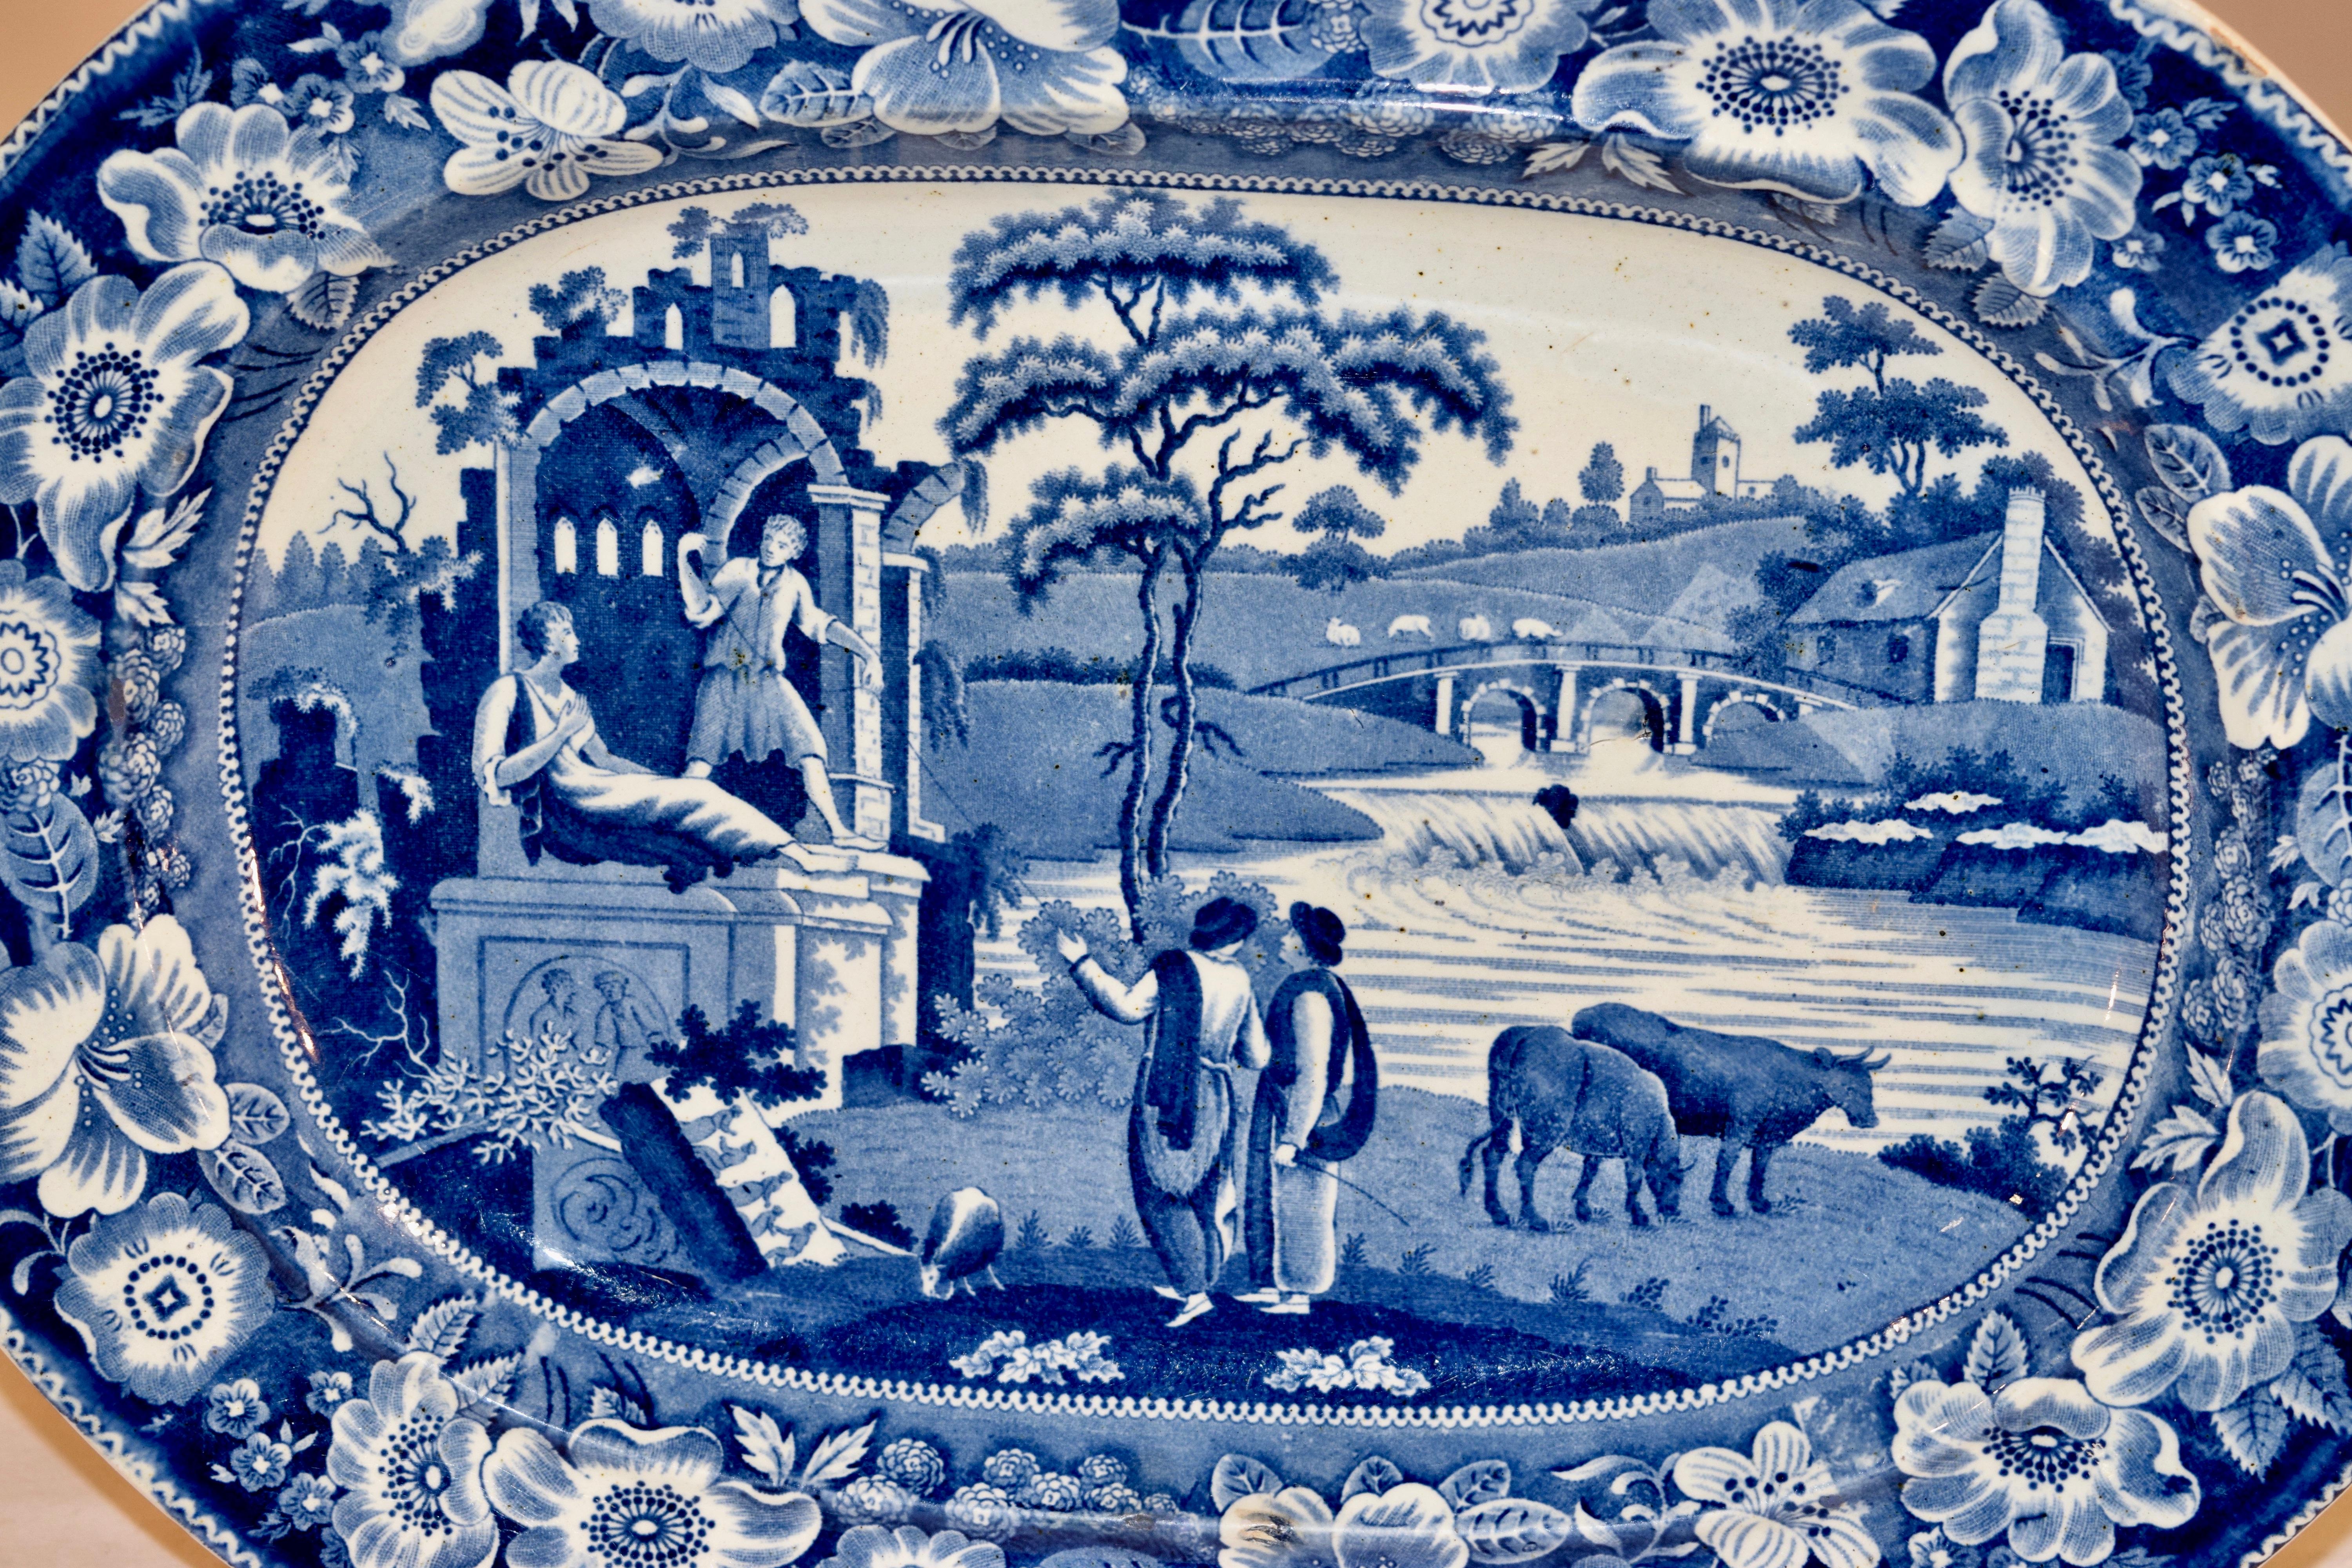 19th century platter in the 